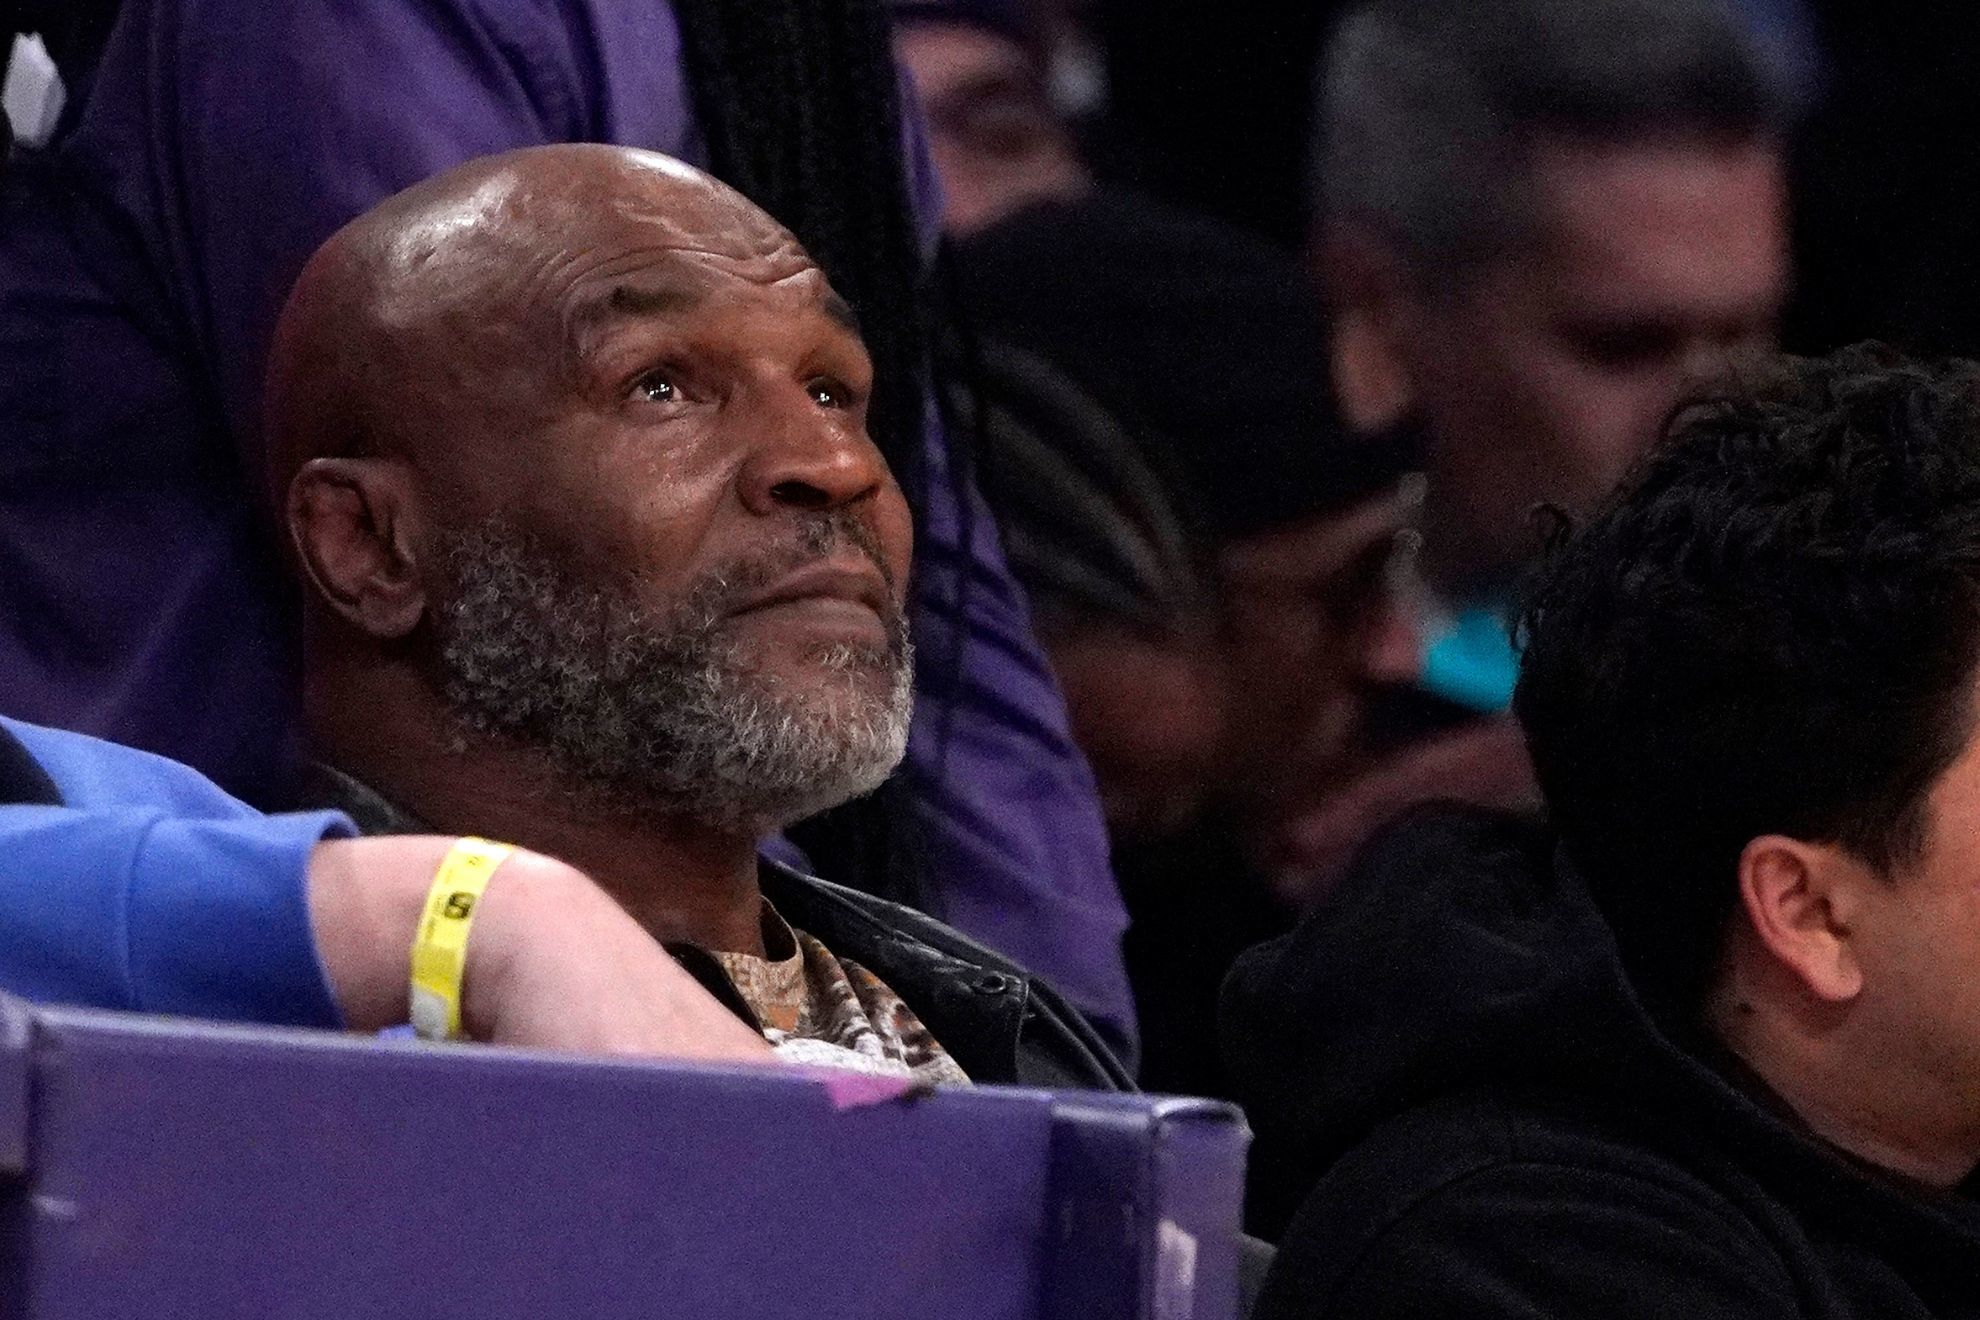 Boxing legend Mike Tyson tells NBA players to smoke his brand of cannabis